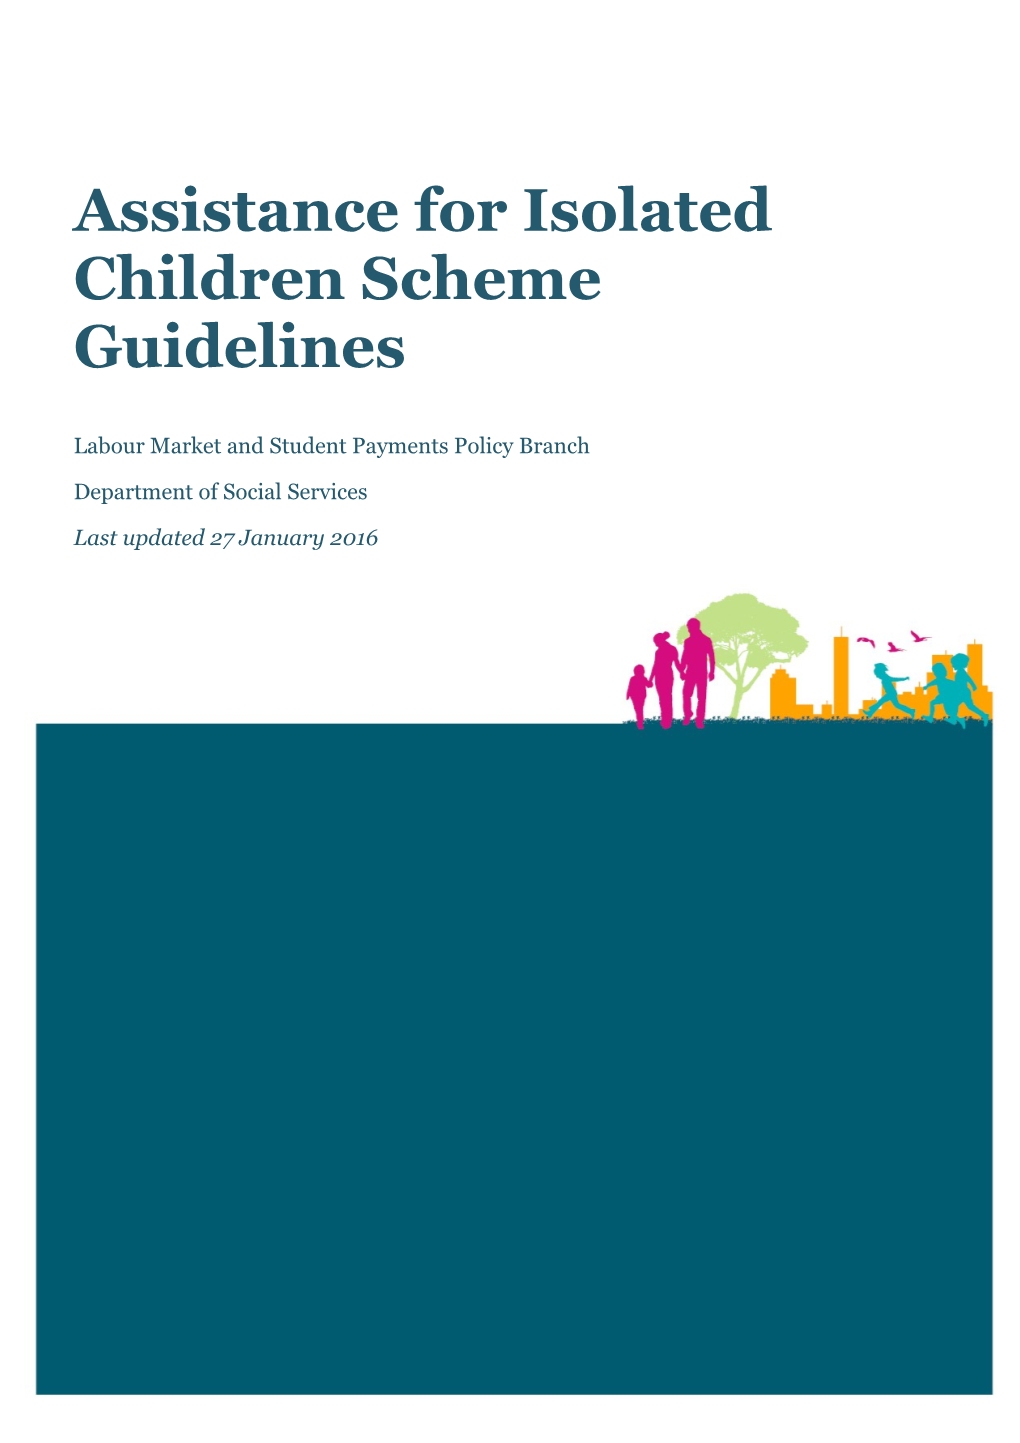 Assistance for Isolated Children Scheme